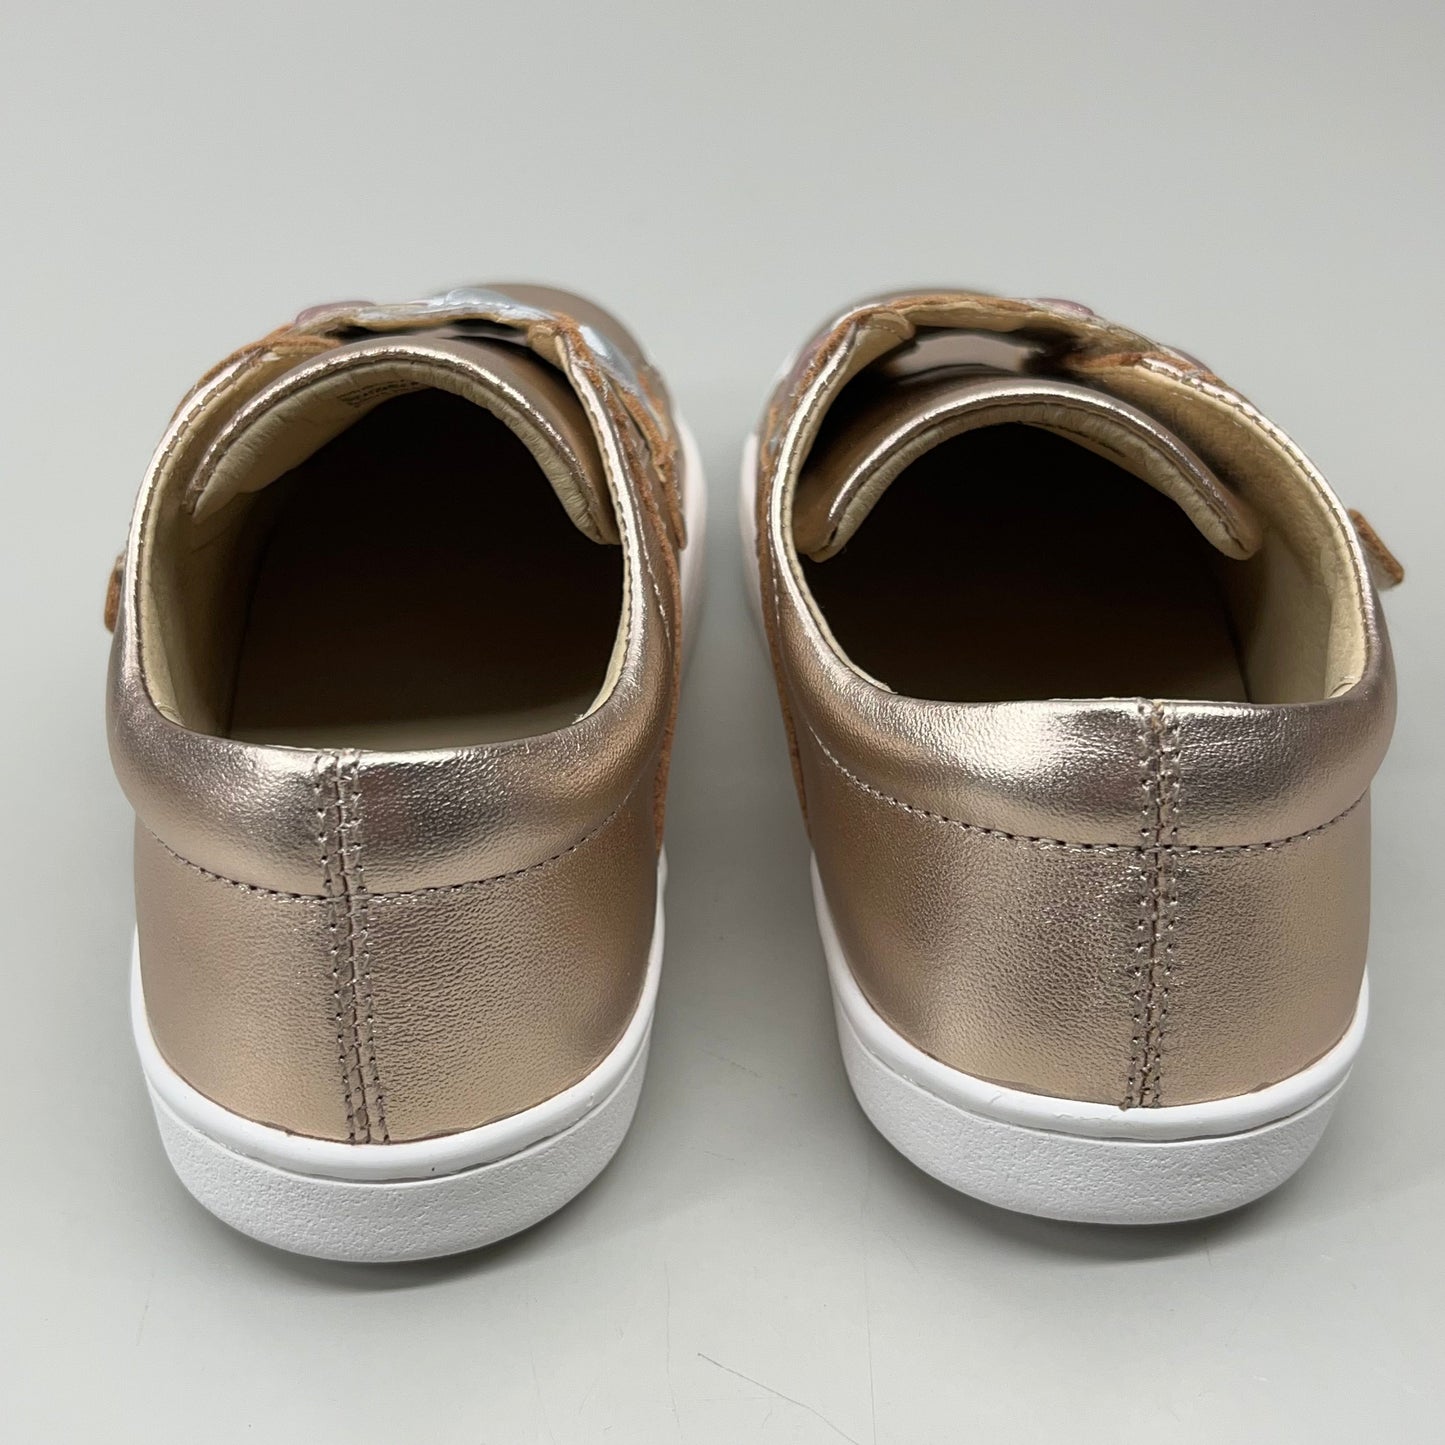 OLD SOLES Igster Sneakers Kid's Leather Shoe Sz 24 US 8 Copper/Silver/Pink Frost #6132